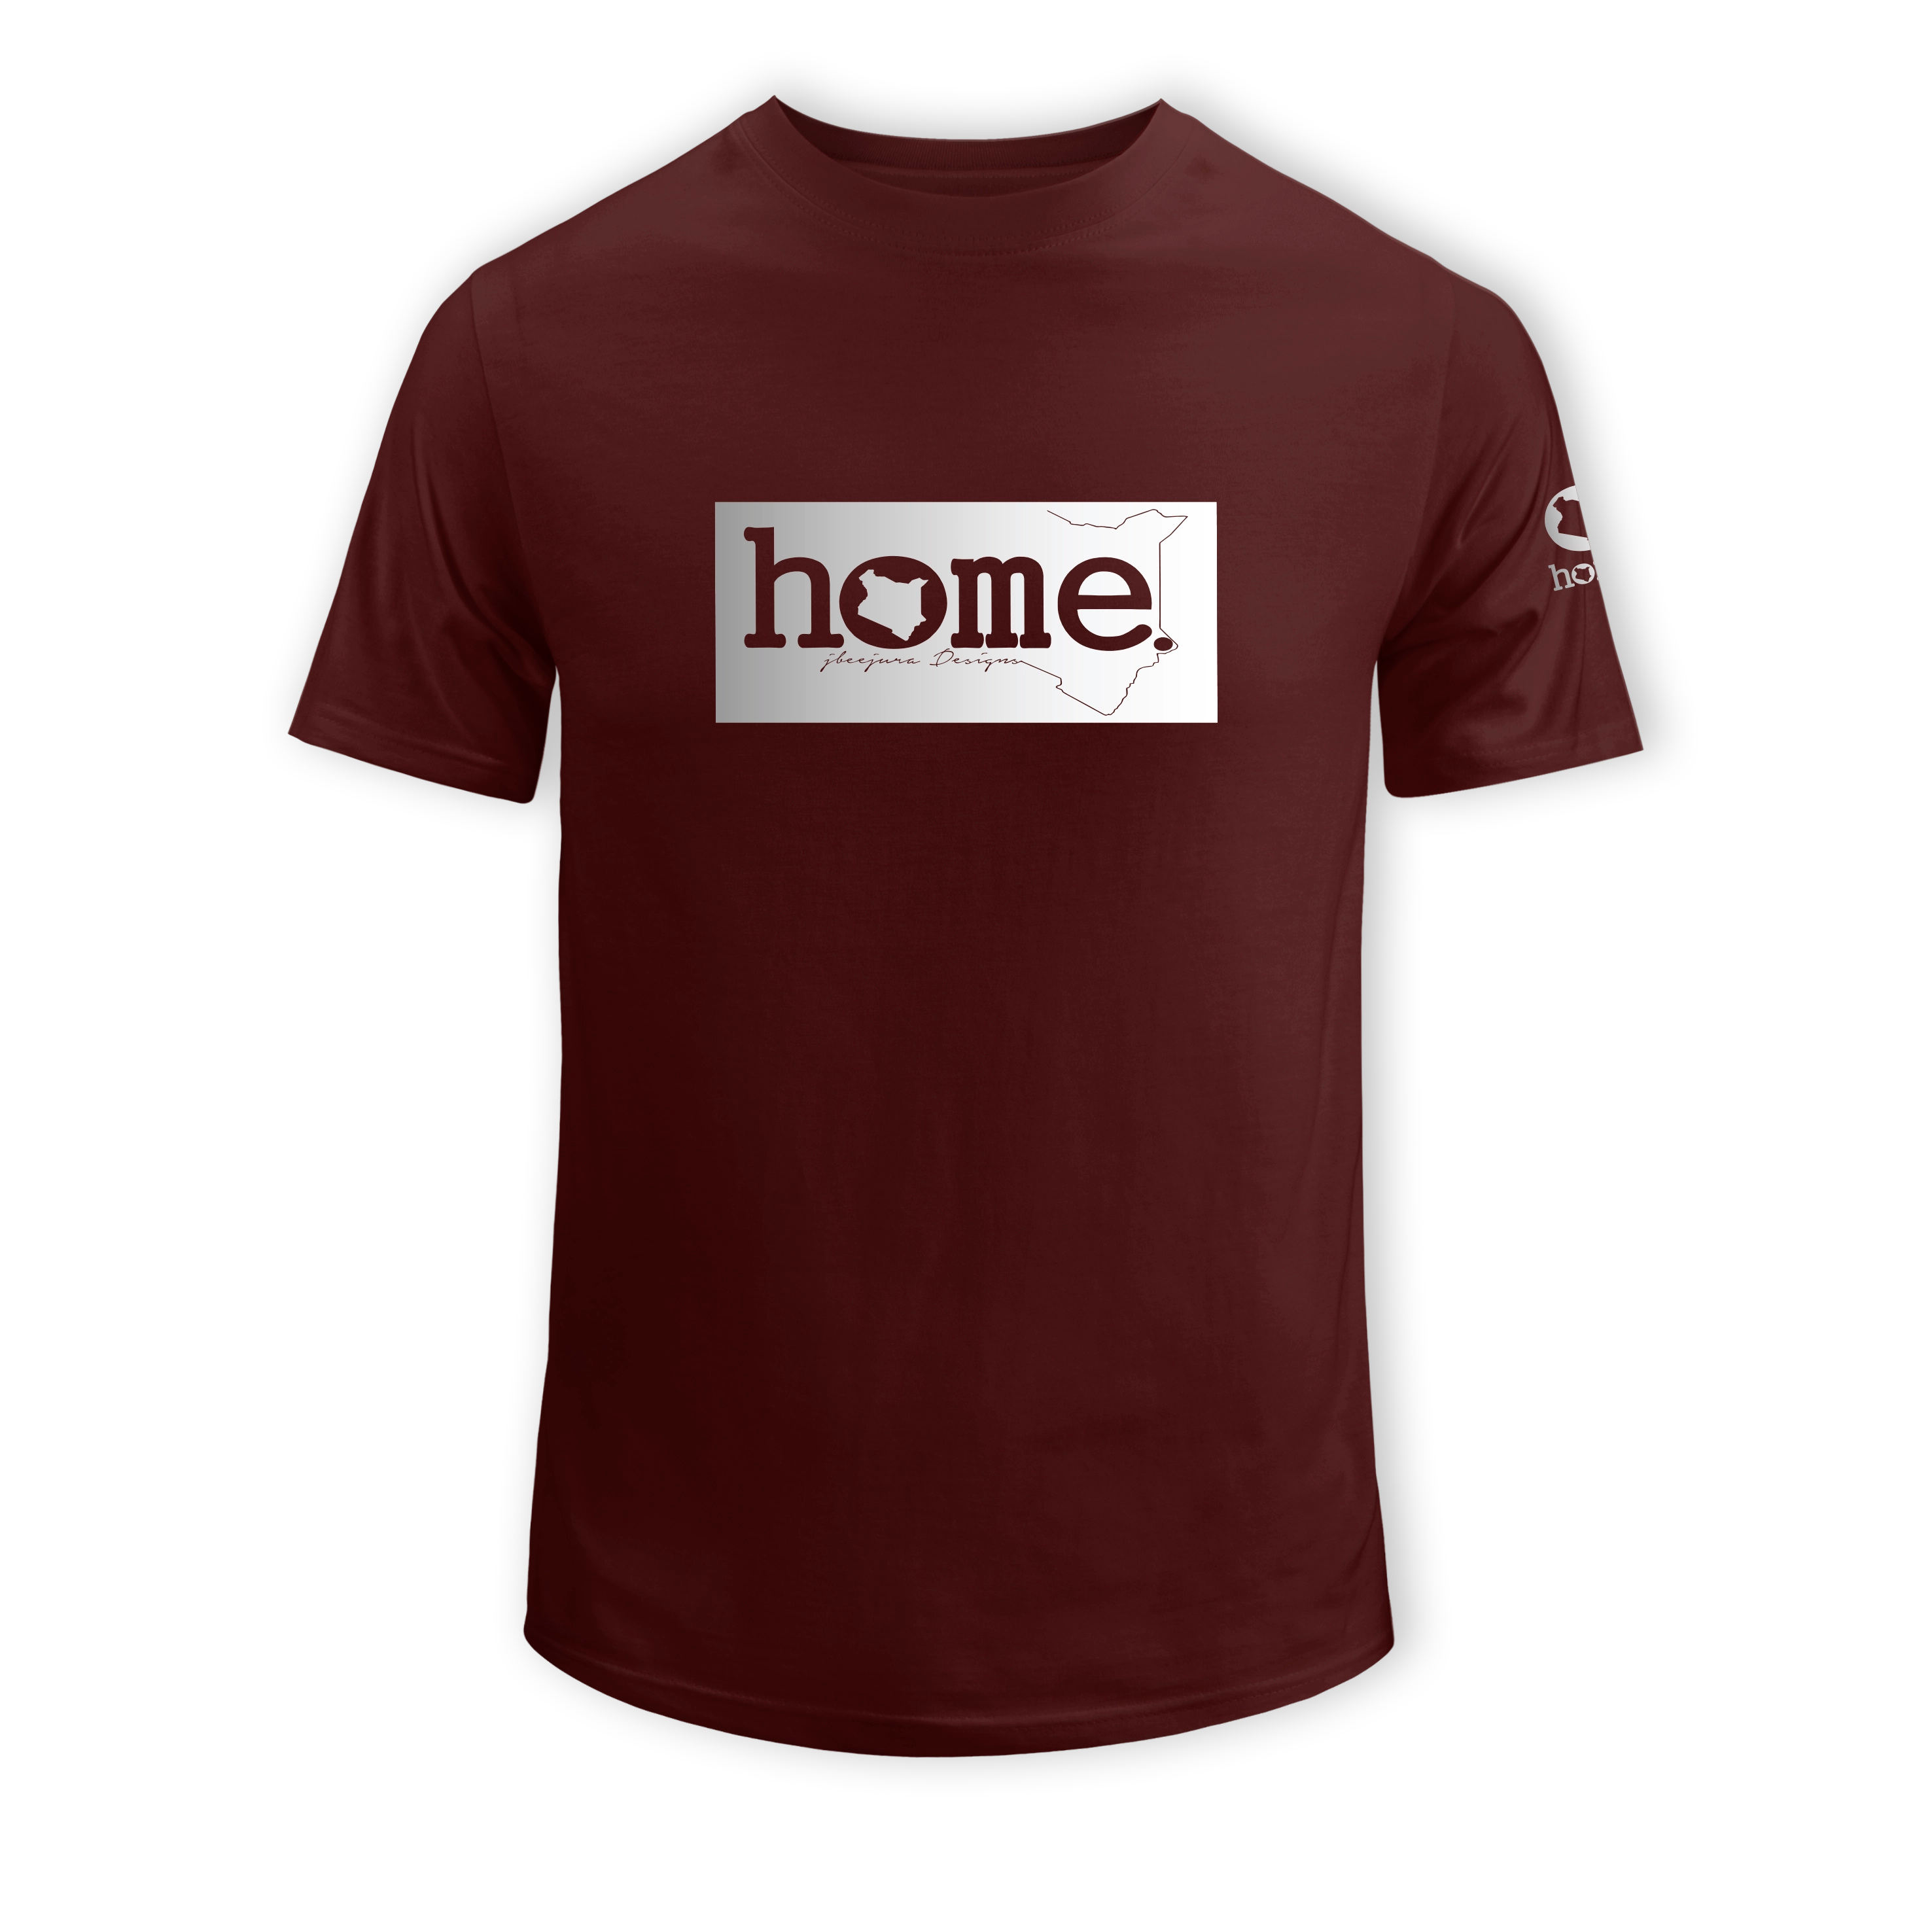 home_254 KIDS SHORT-SLEEVED MAROON T-SHIRT WITH A SILVER CLASSIC PRINT – COTTON PLUS FABRIC